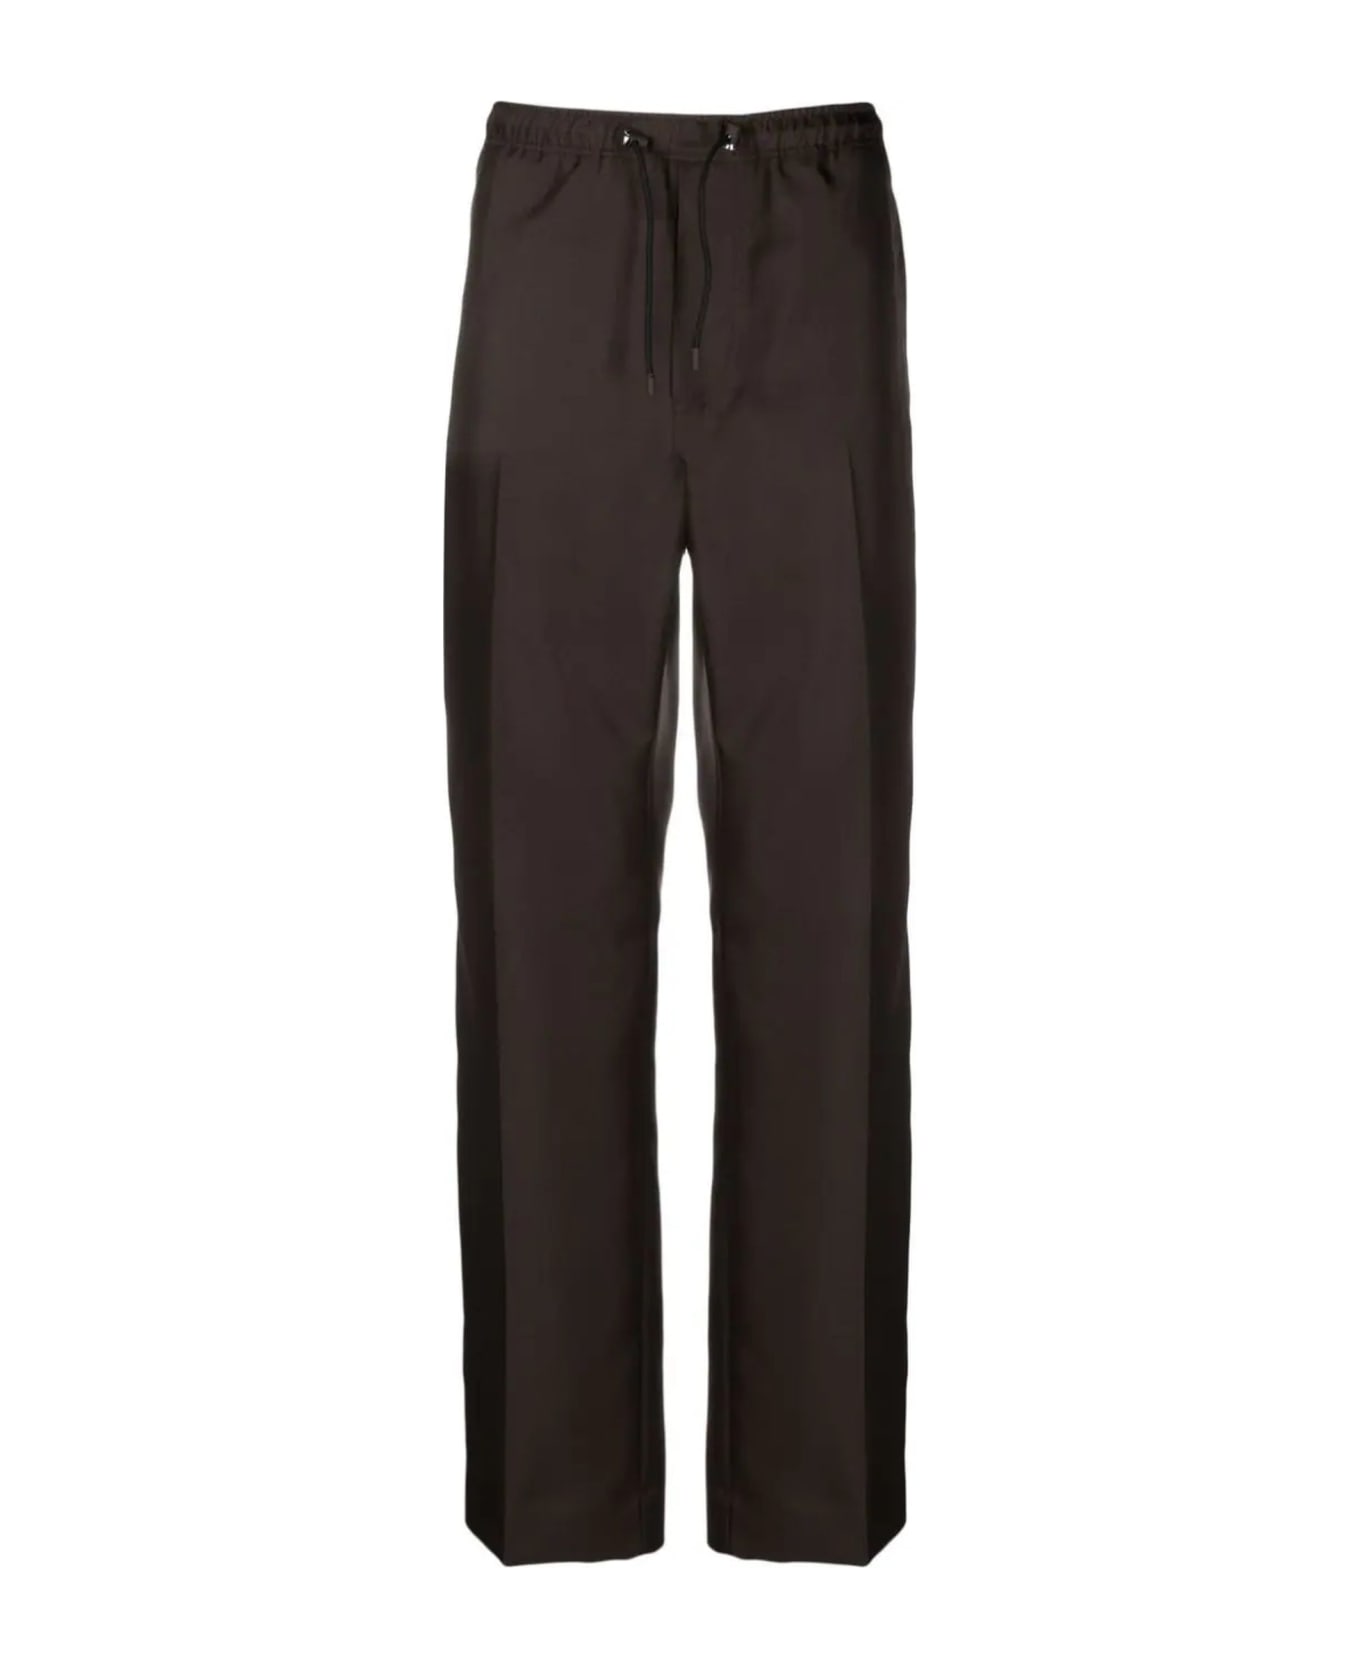 Lanvin Coffee Brown Cotton Blend Trousers - Expresso